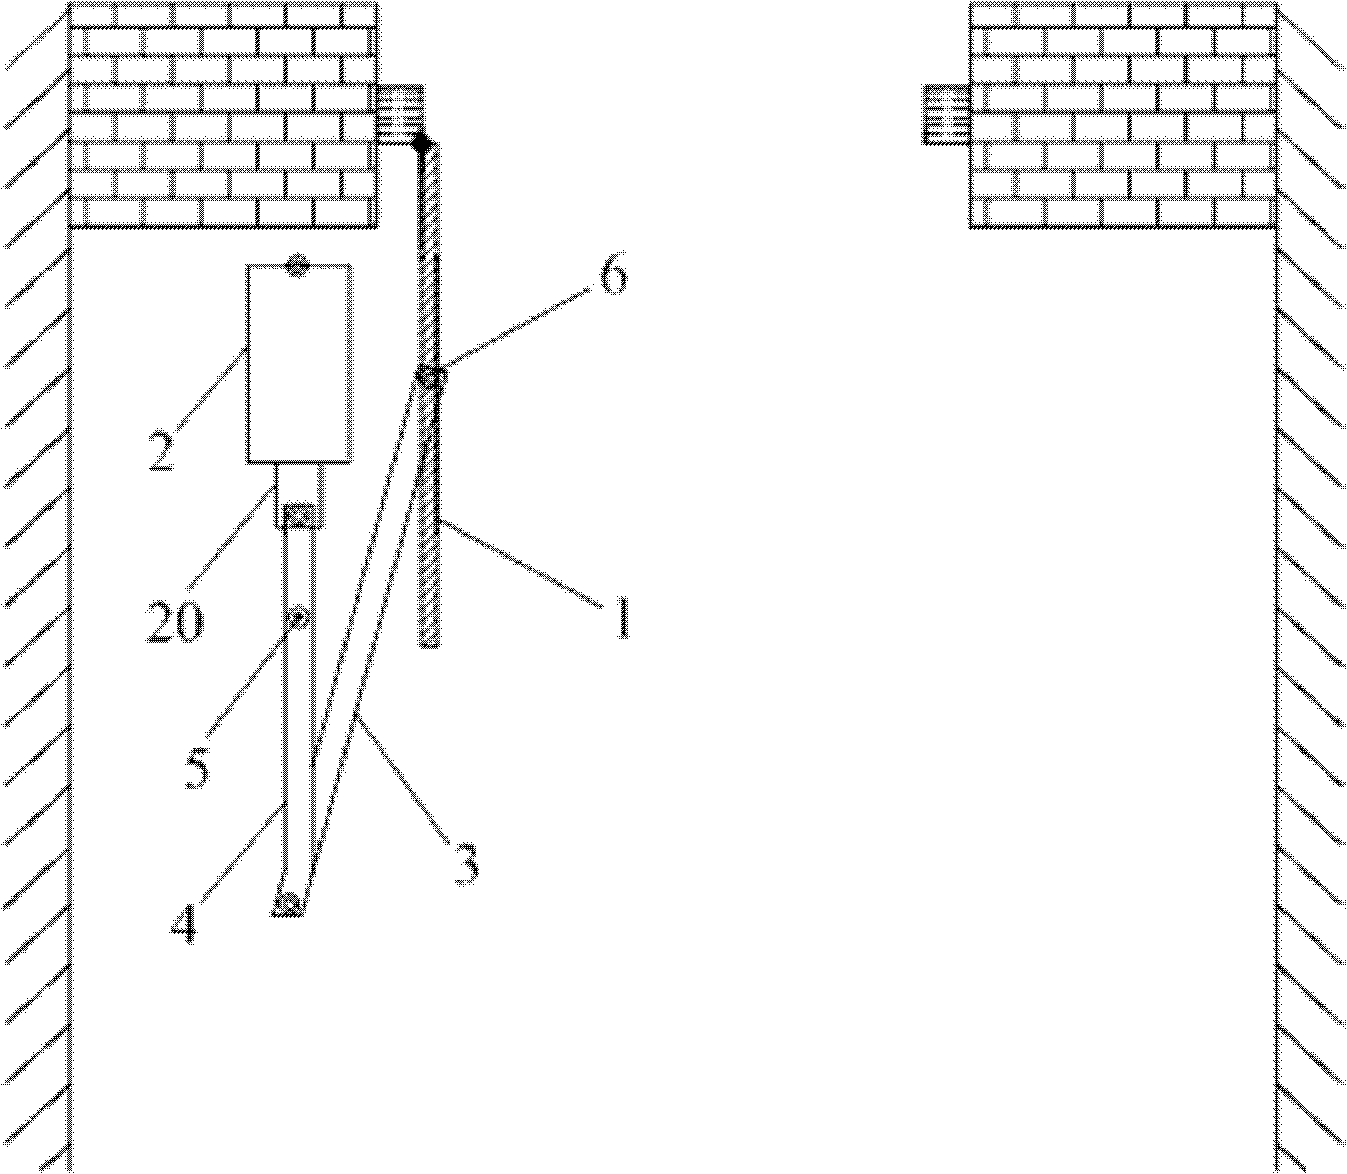 Air door opening and closing device